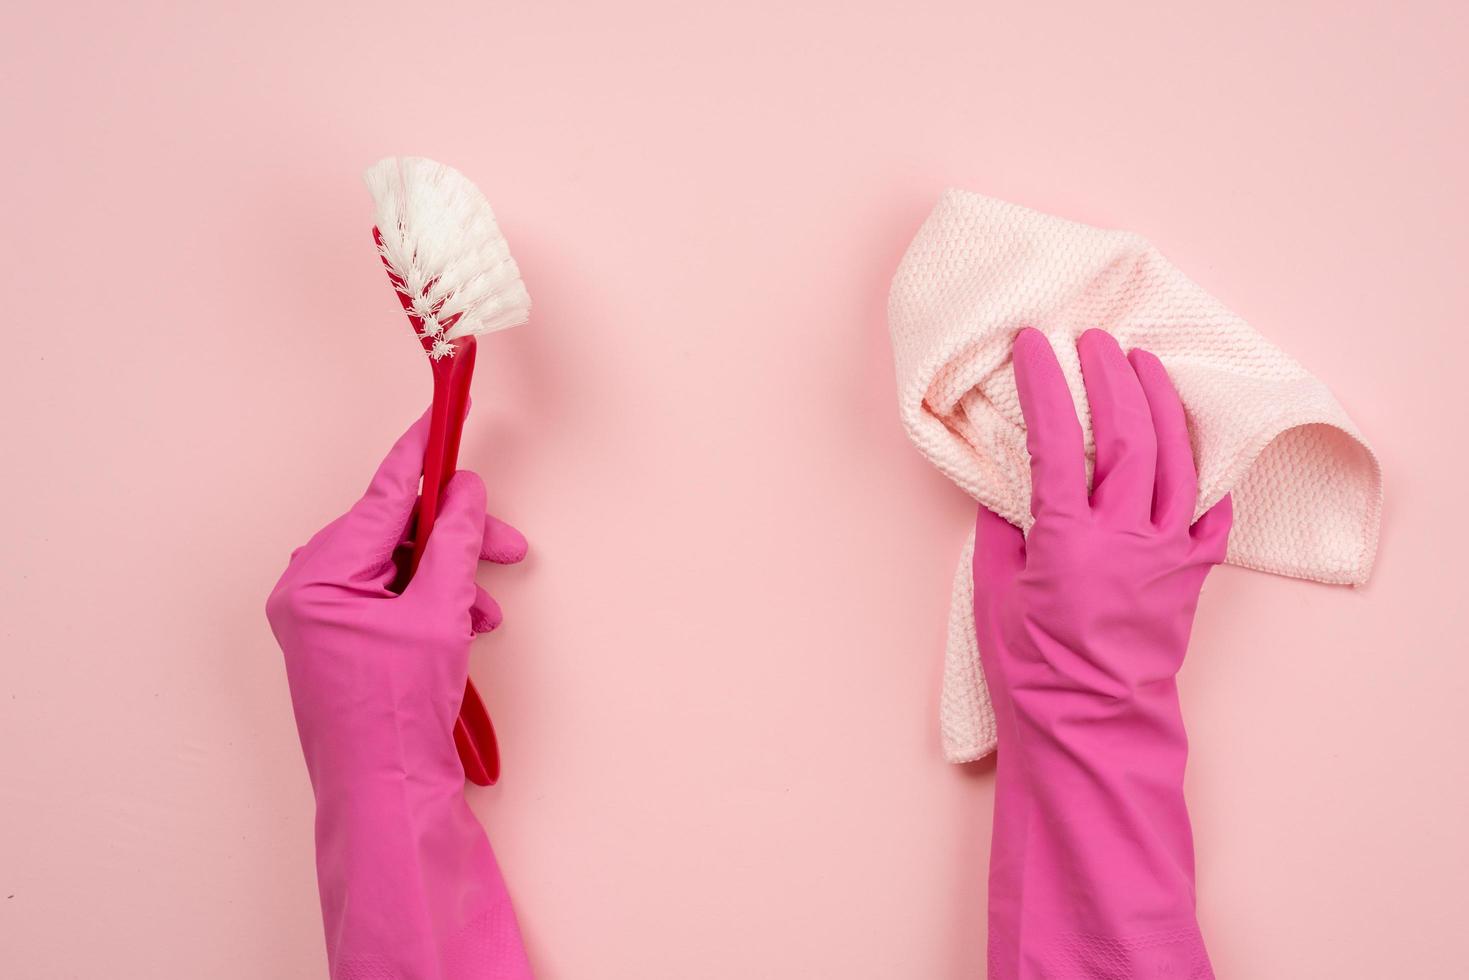 Closeup hands wearing in latex gloves holding a rag and household brush. Top view on pink background photo